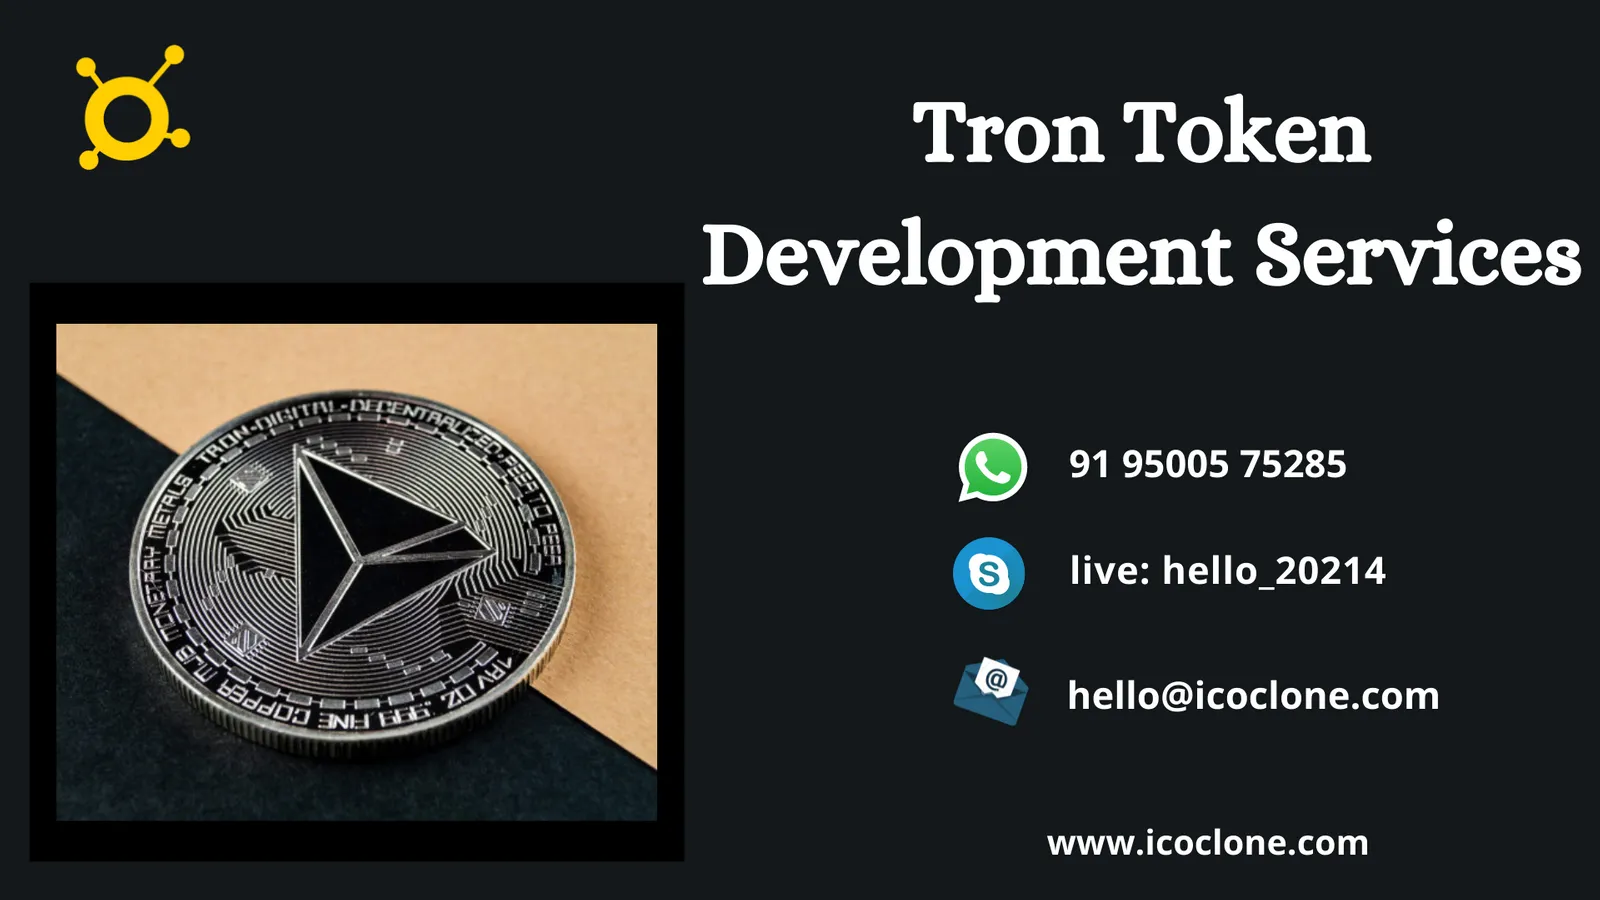 Beneficial state of creating Tron based crypto token for business